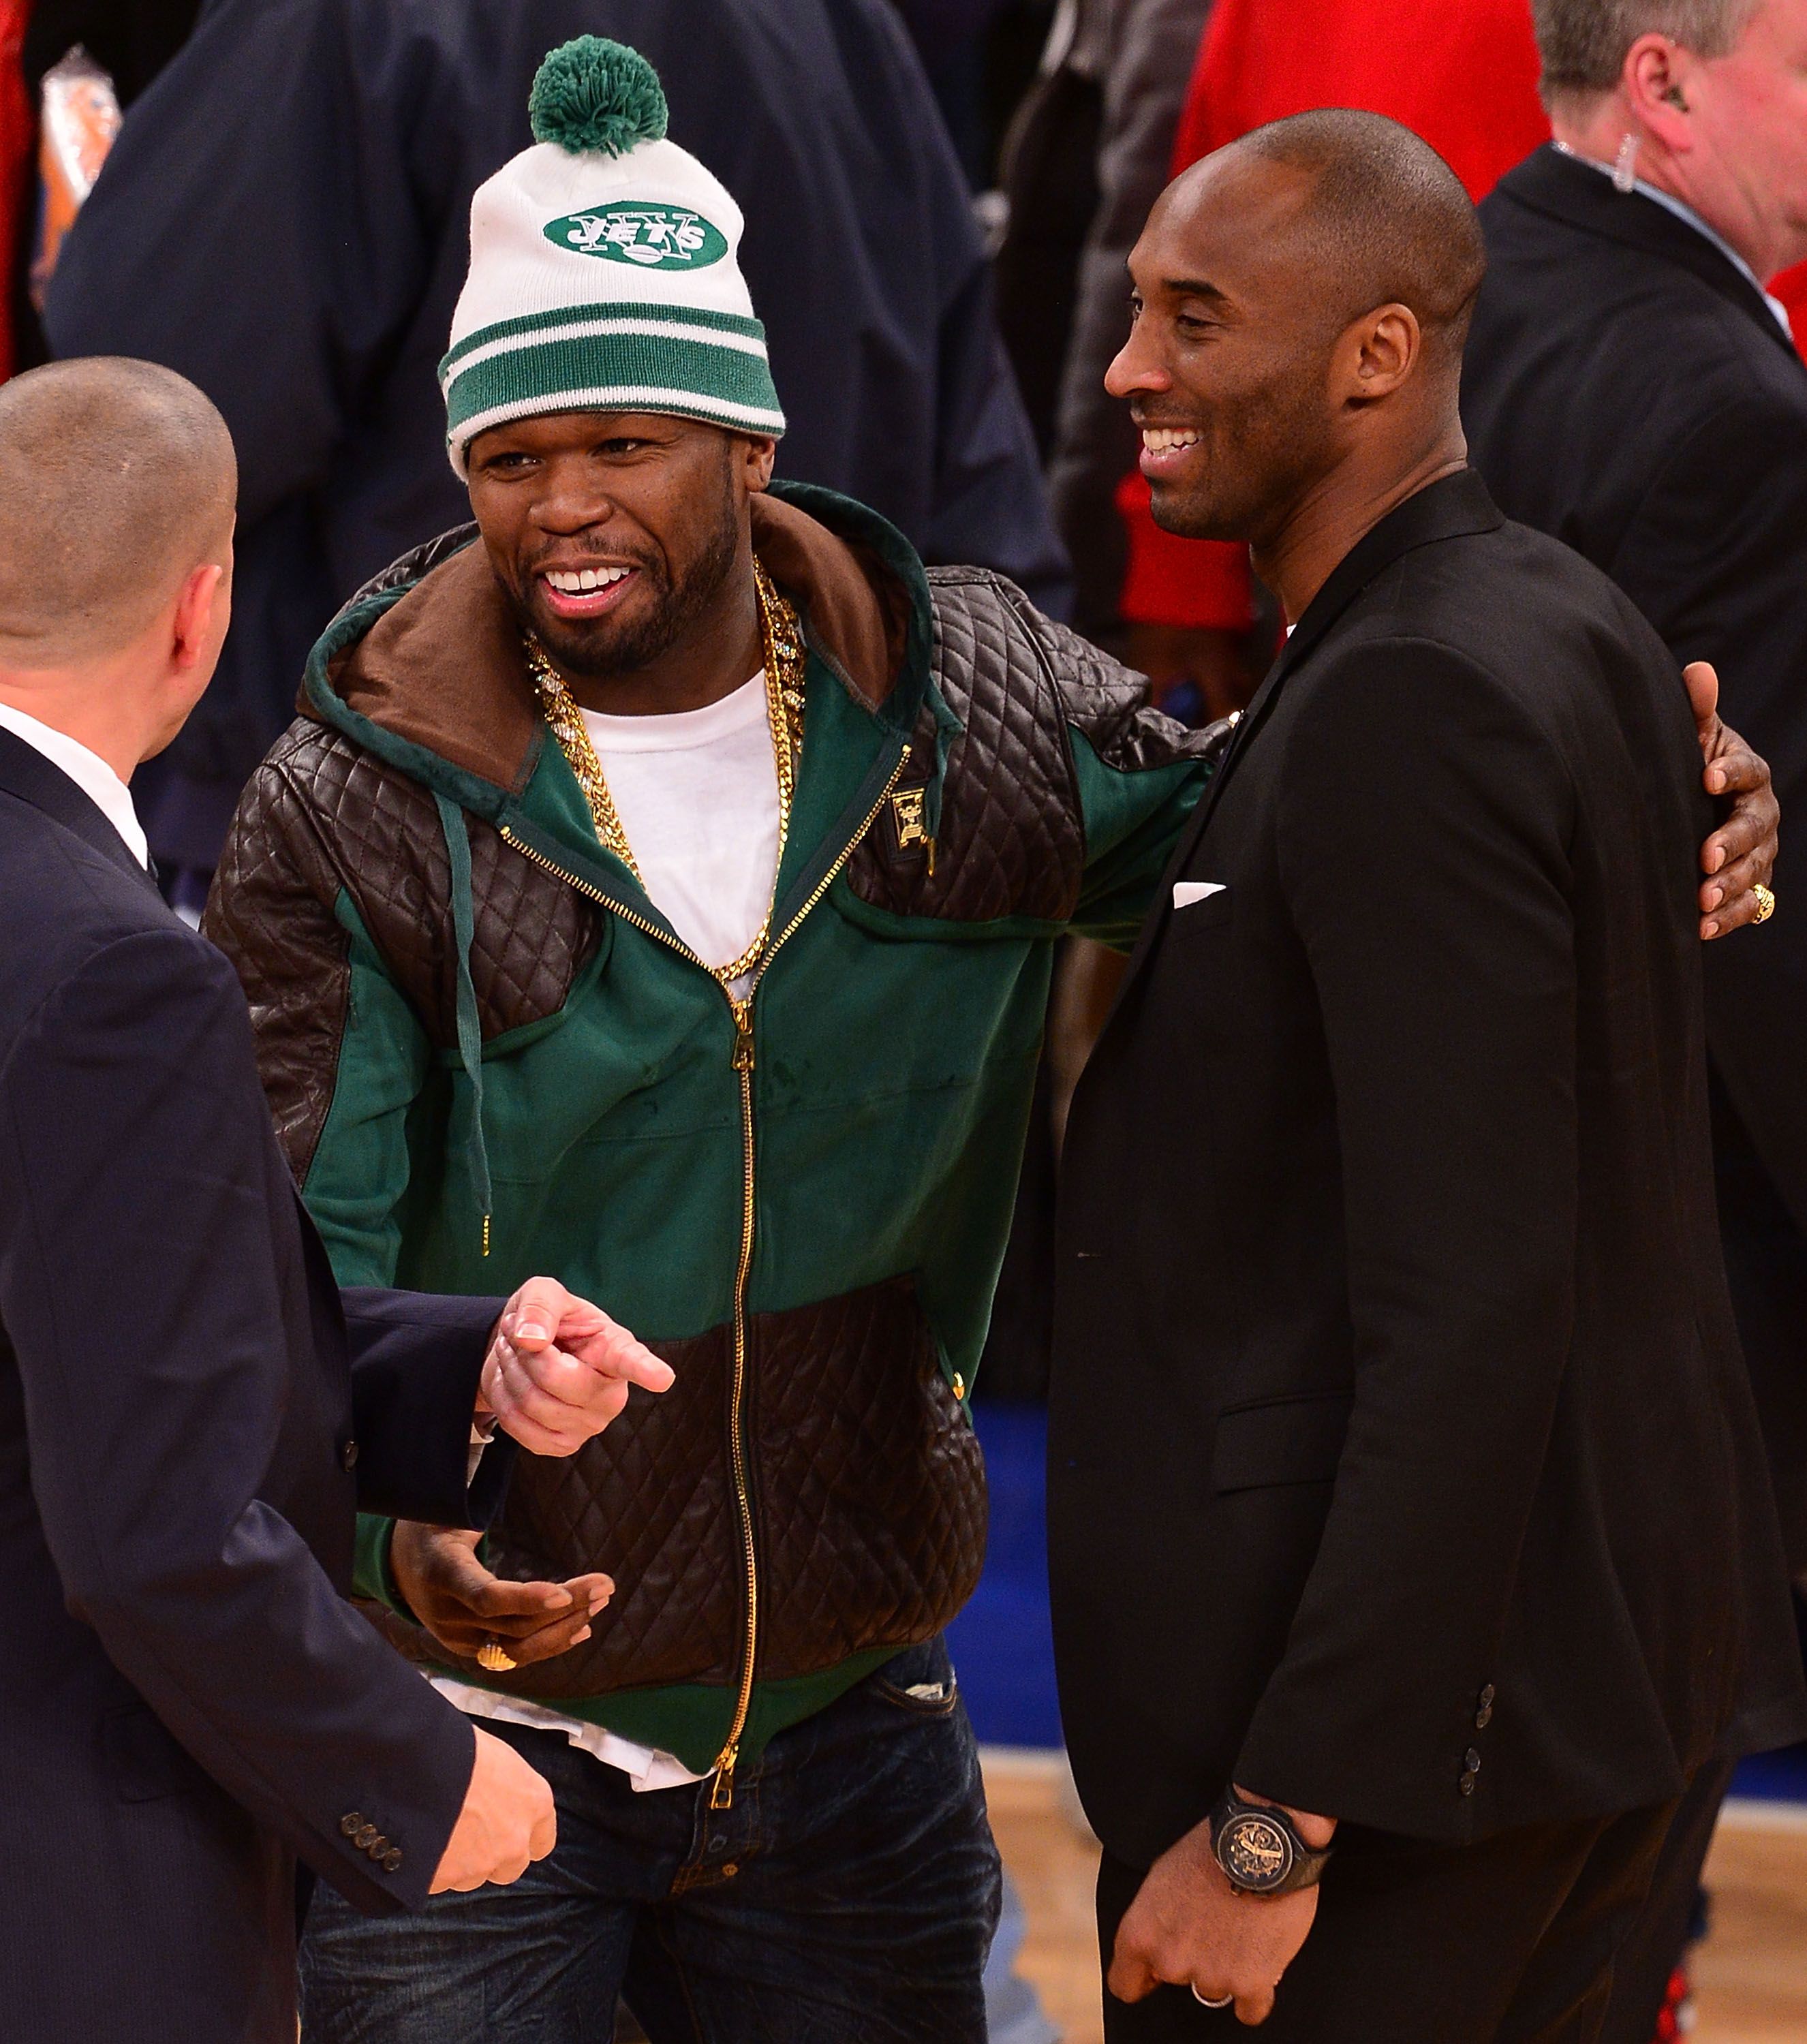 50 Cent and Kobe Bryant share an embrace as they attended the Los Angeles Lakers versus the New York Knicks on January 26, 2014 in New York | Source: Getty Images (Photo by James Devaney/GC Images)